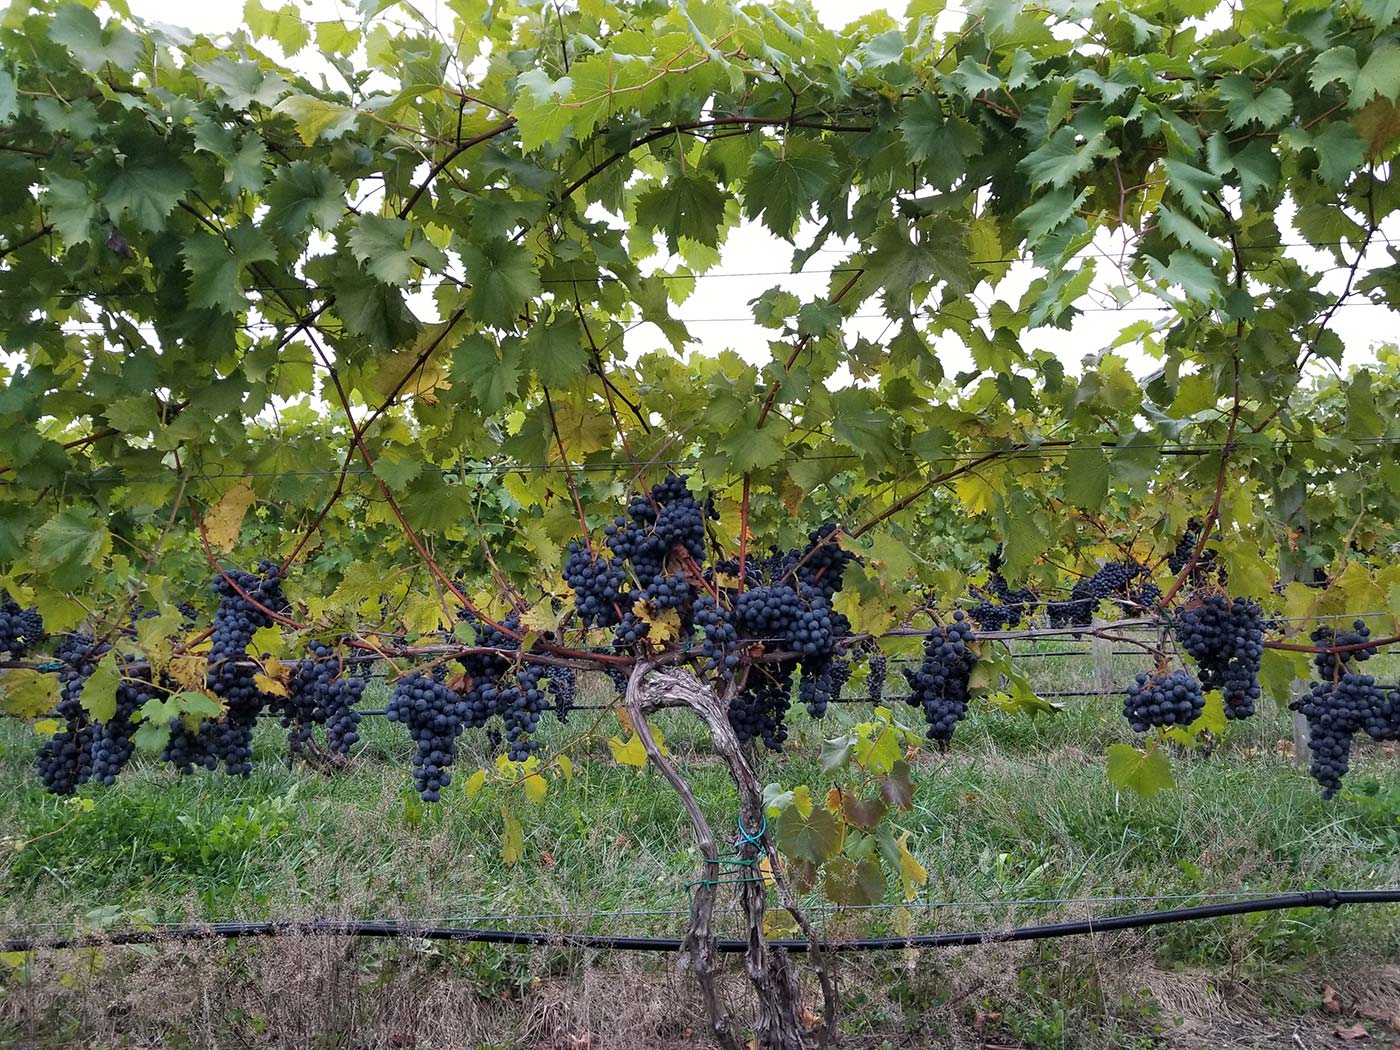 Chambourcin on the vine at Bellview Winery, Landisville